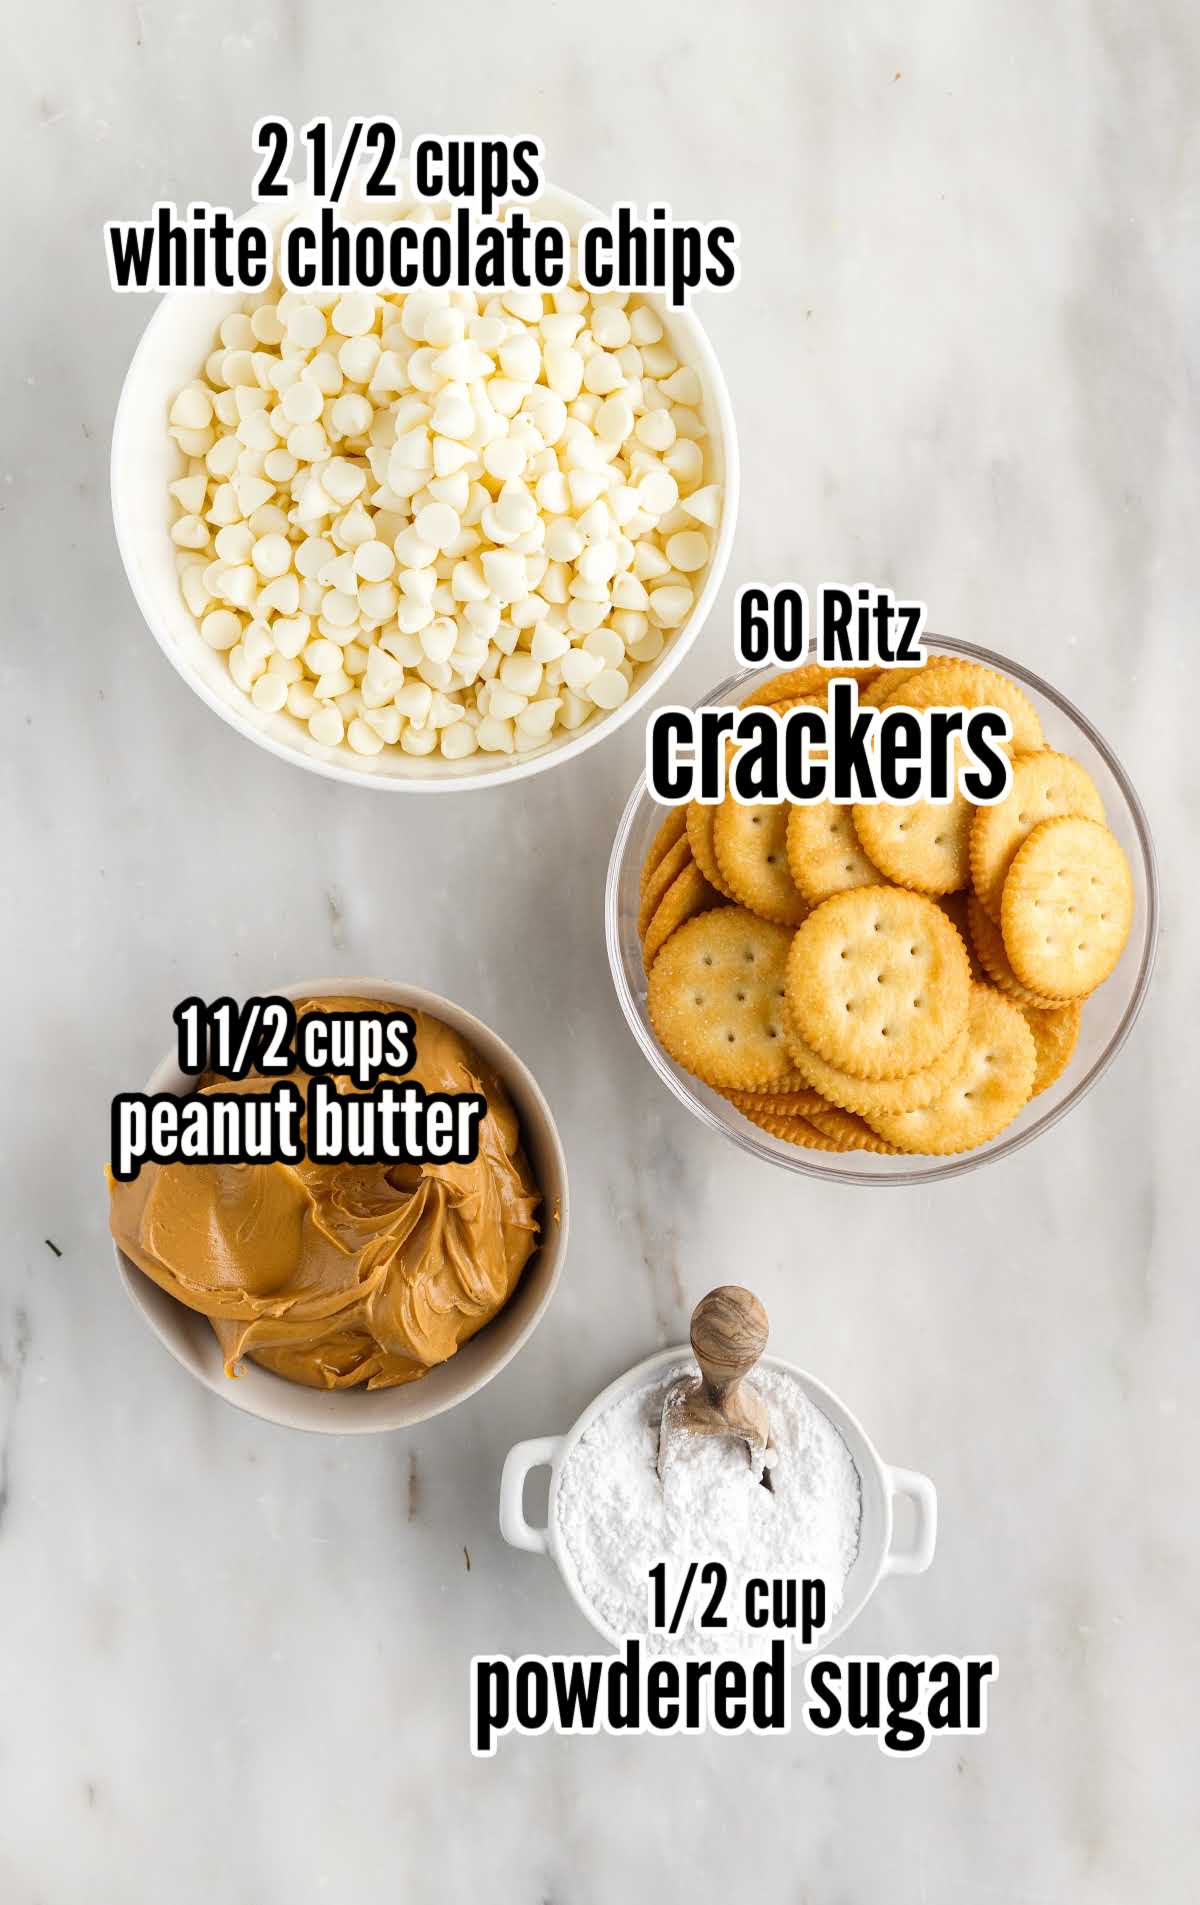 ritz crackers dipped in white chocolate ingredients